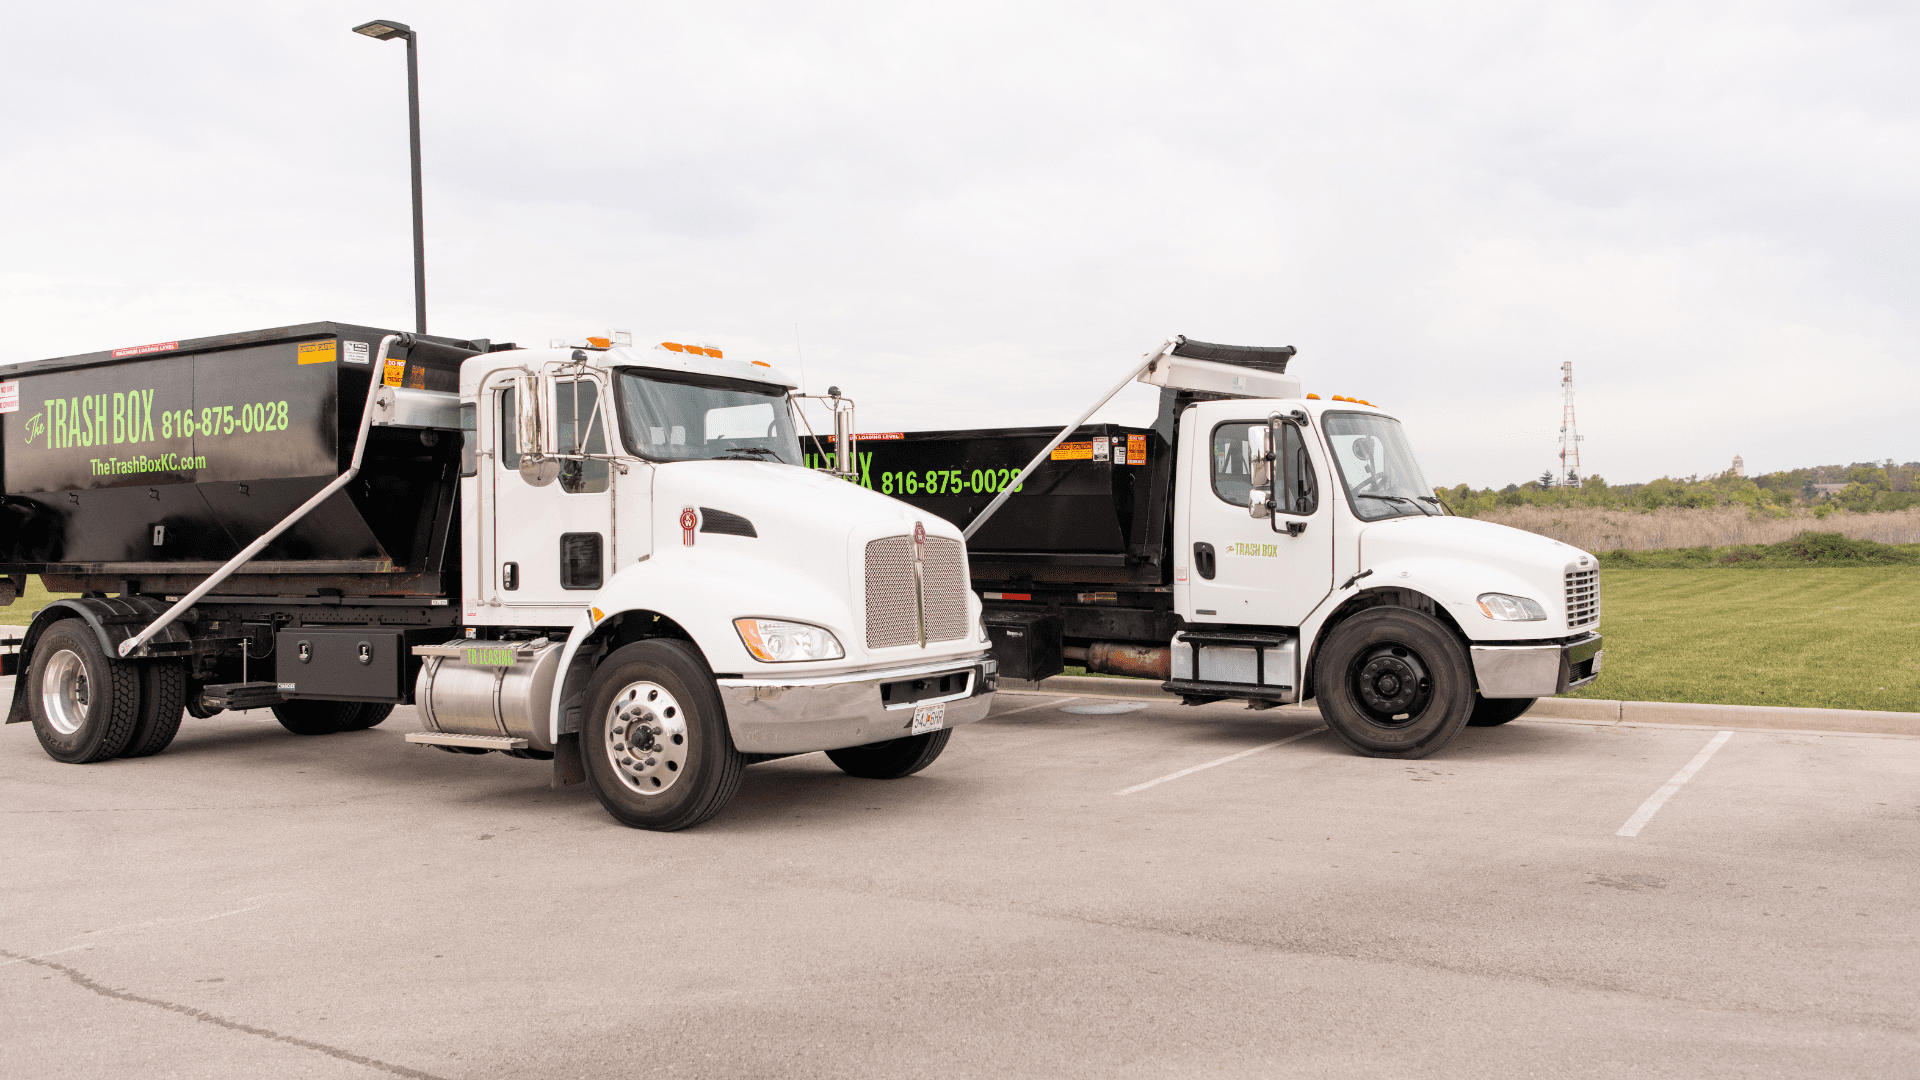 Need Dumpster Rental Services in Kansas City?